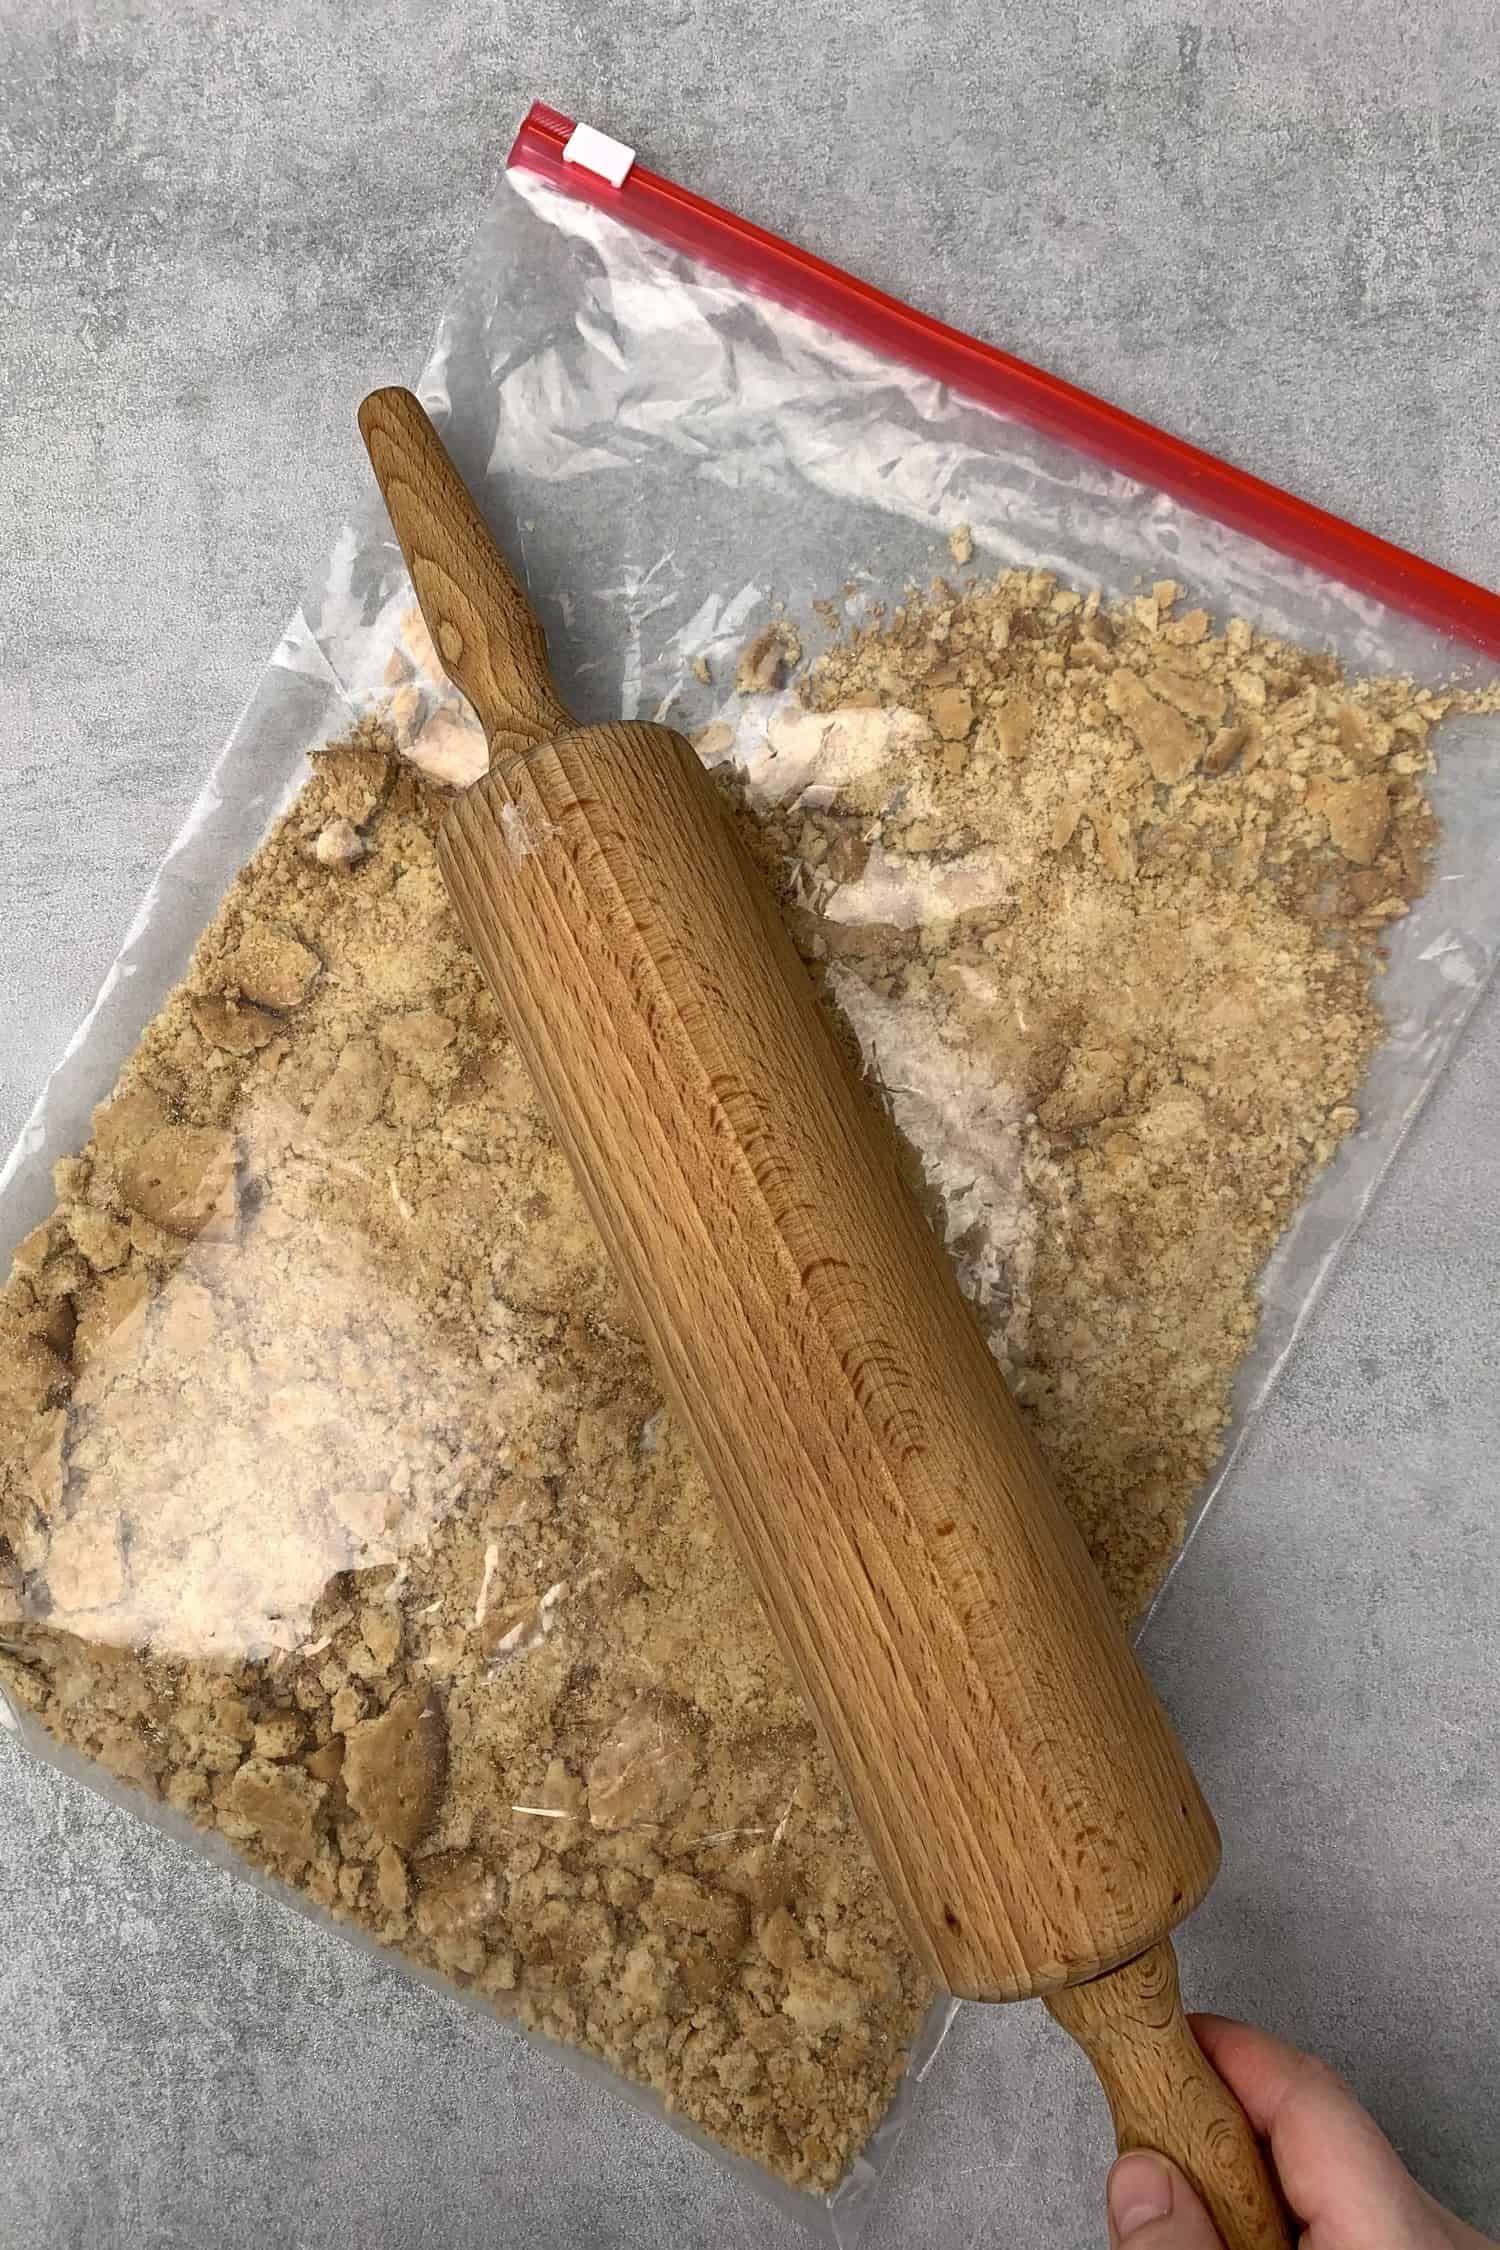 Crushing biscuits in a zipper bag with a rolling pin.